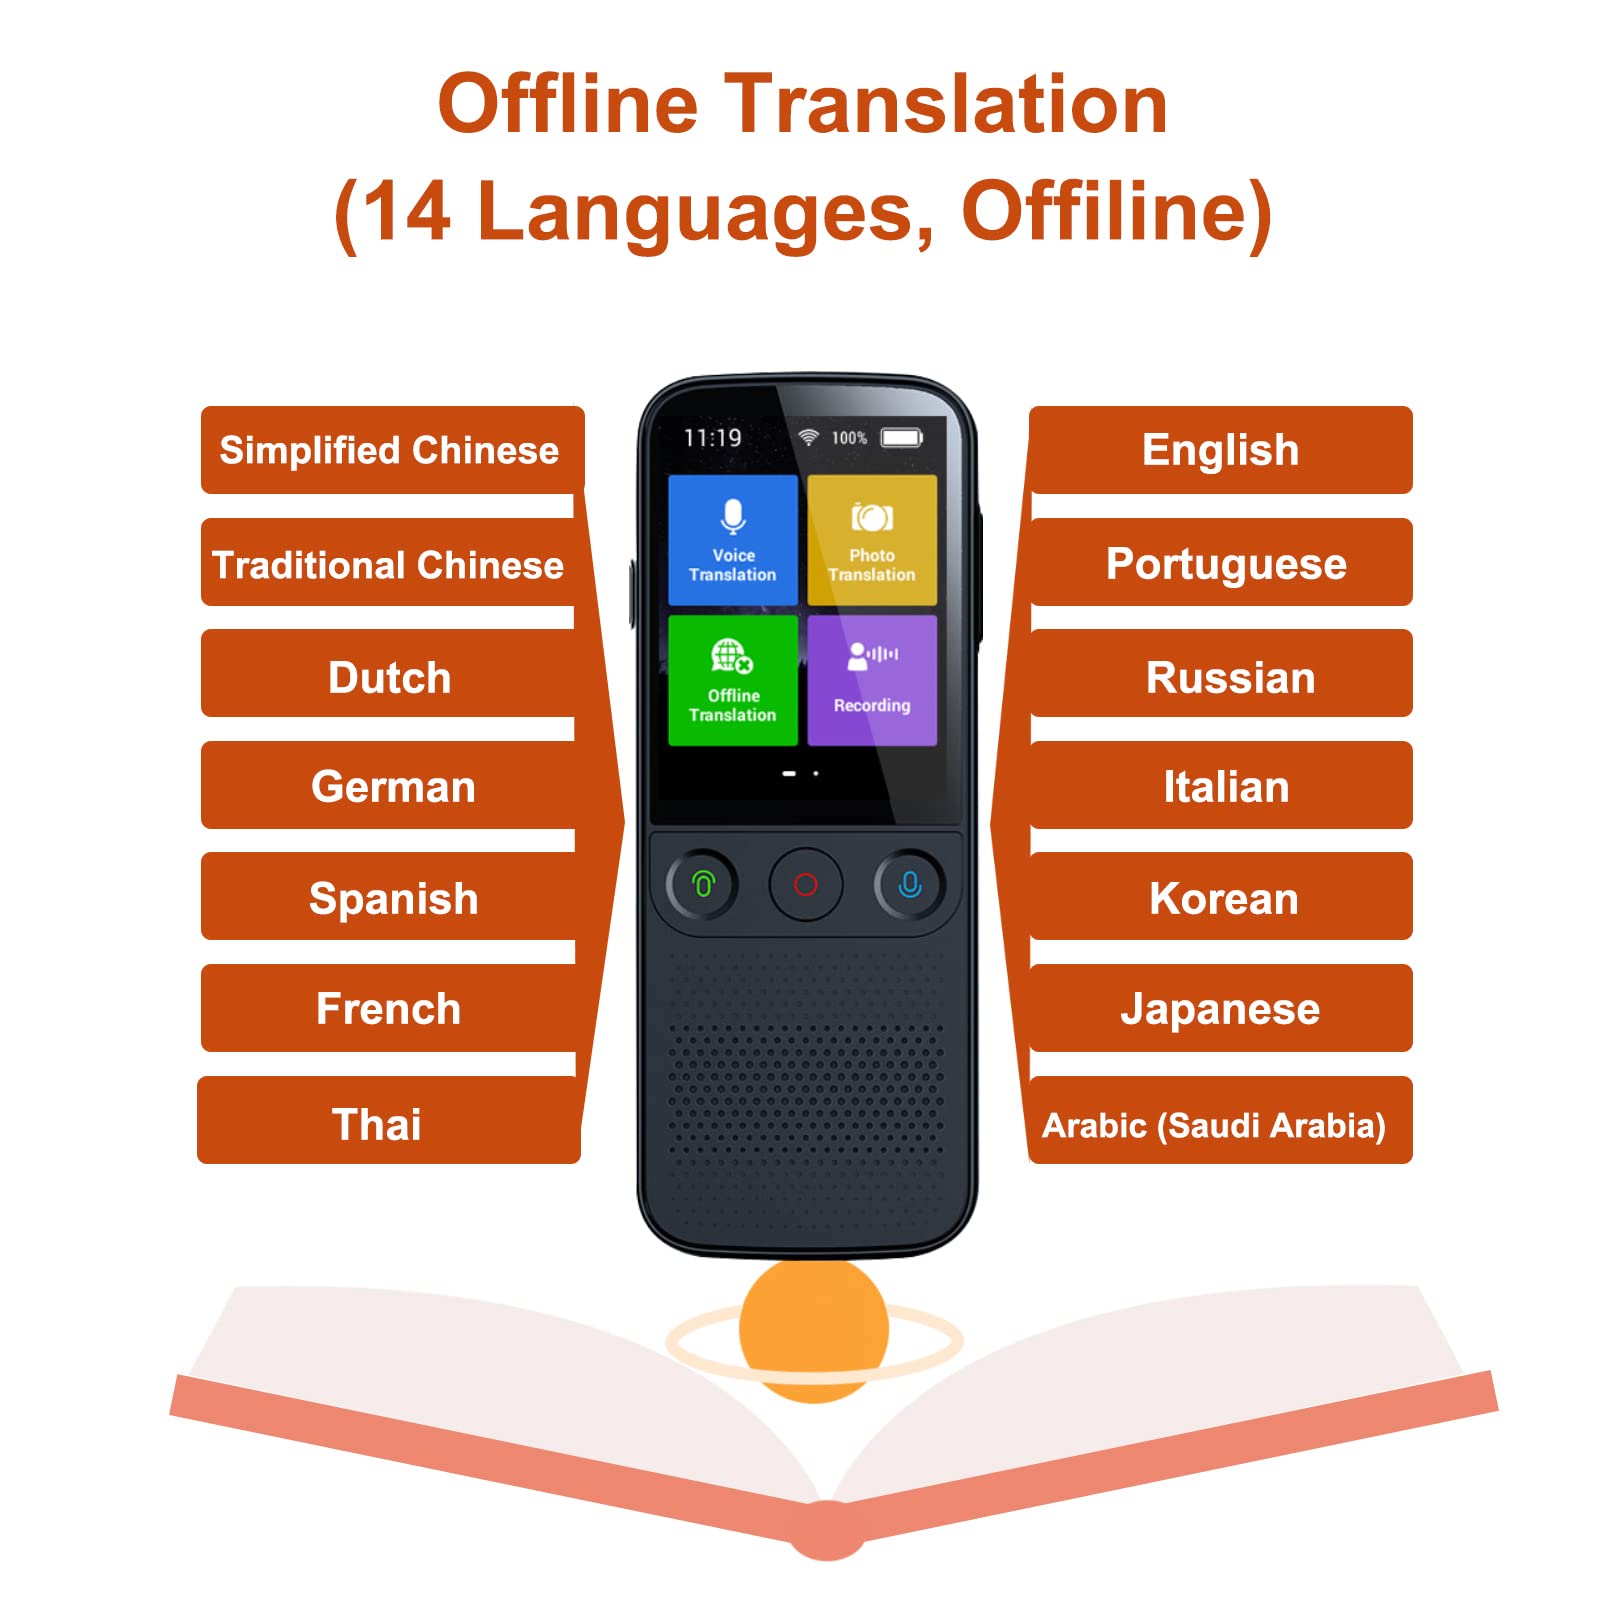 Language Instant Translator Device Portable Real-time Voice Translation in 137 Different Languages and Accents, Support Offline/WiFi/Hotspot Accuracy Image Interpreter Translation